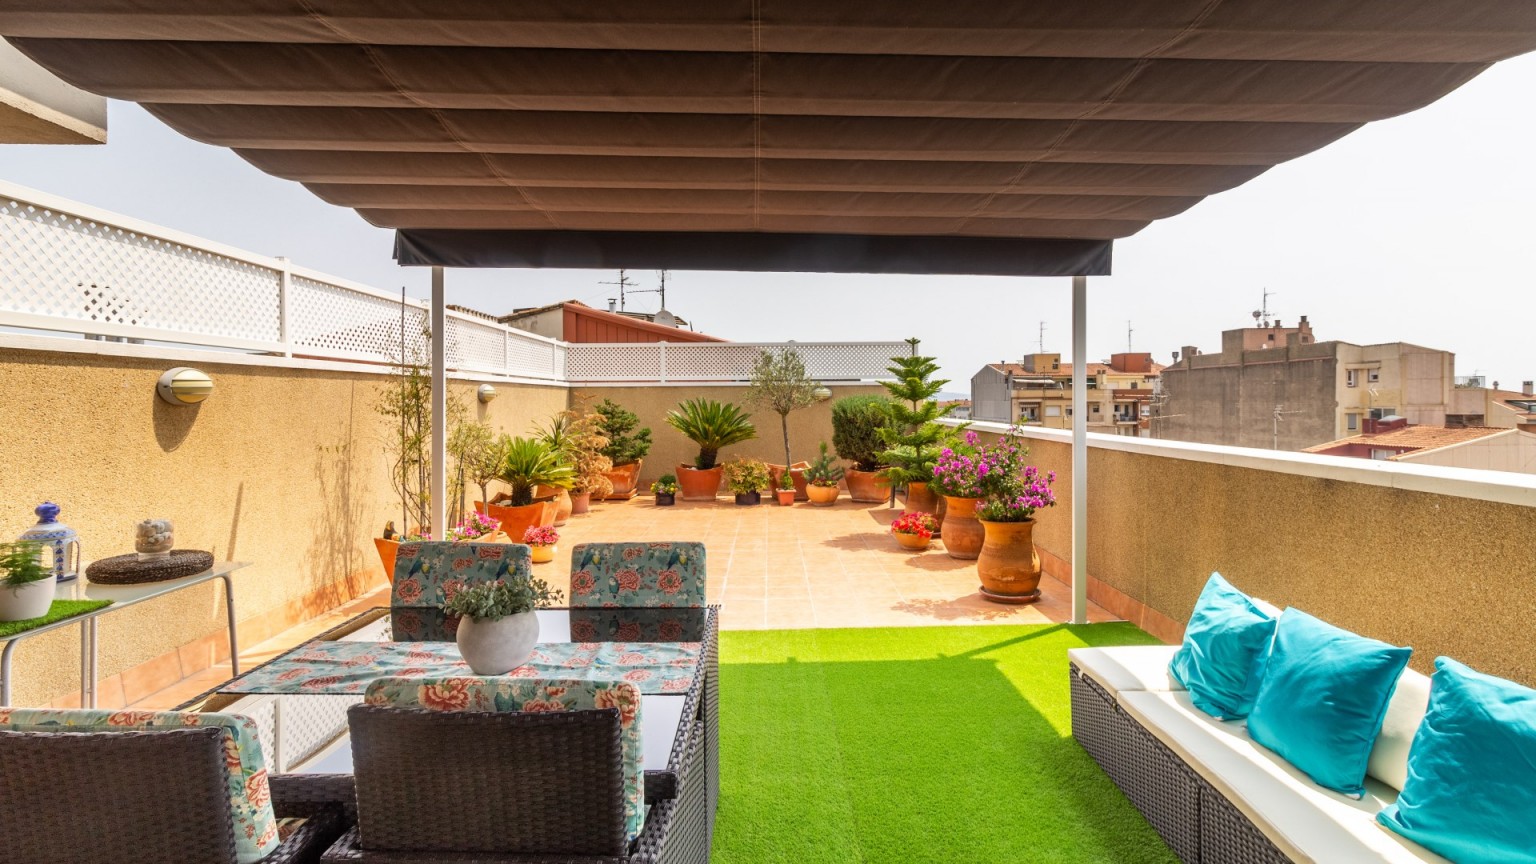 Fantastic duplex-penthouse for sale, with large terraces and parking and storage room included.